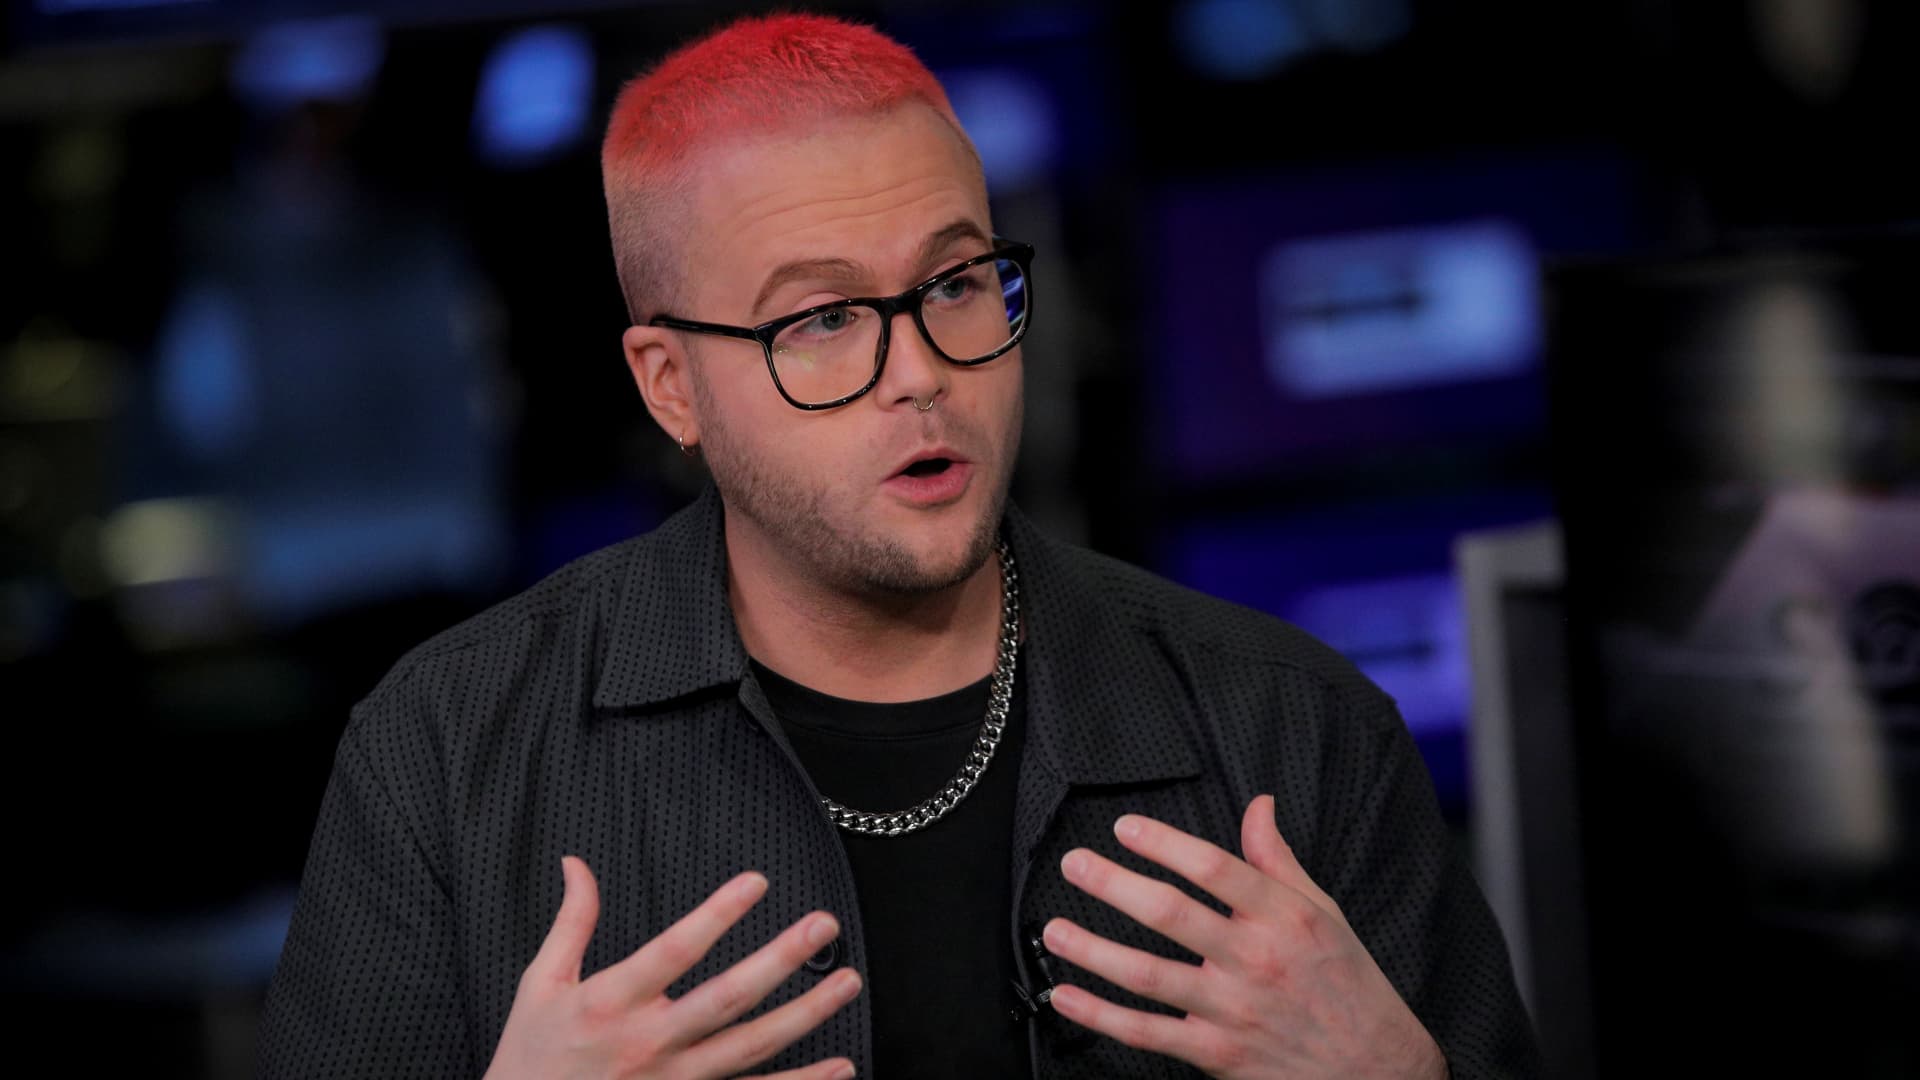 Christopher Wylie, a whistleblower who formerly worked with Cambridge Analytica, speaks during an interview on CNBC on the floor at the New York Stock Exchange (NYSE) in New York, U.S., October 9, 2019.